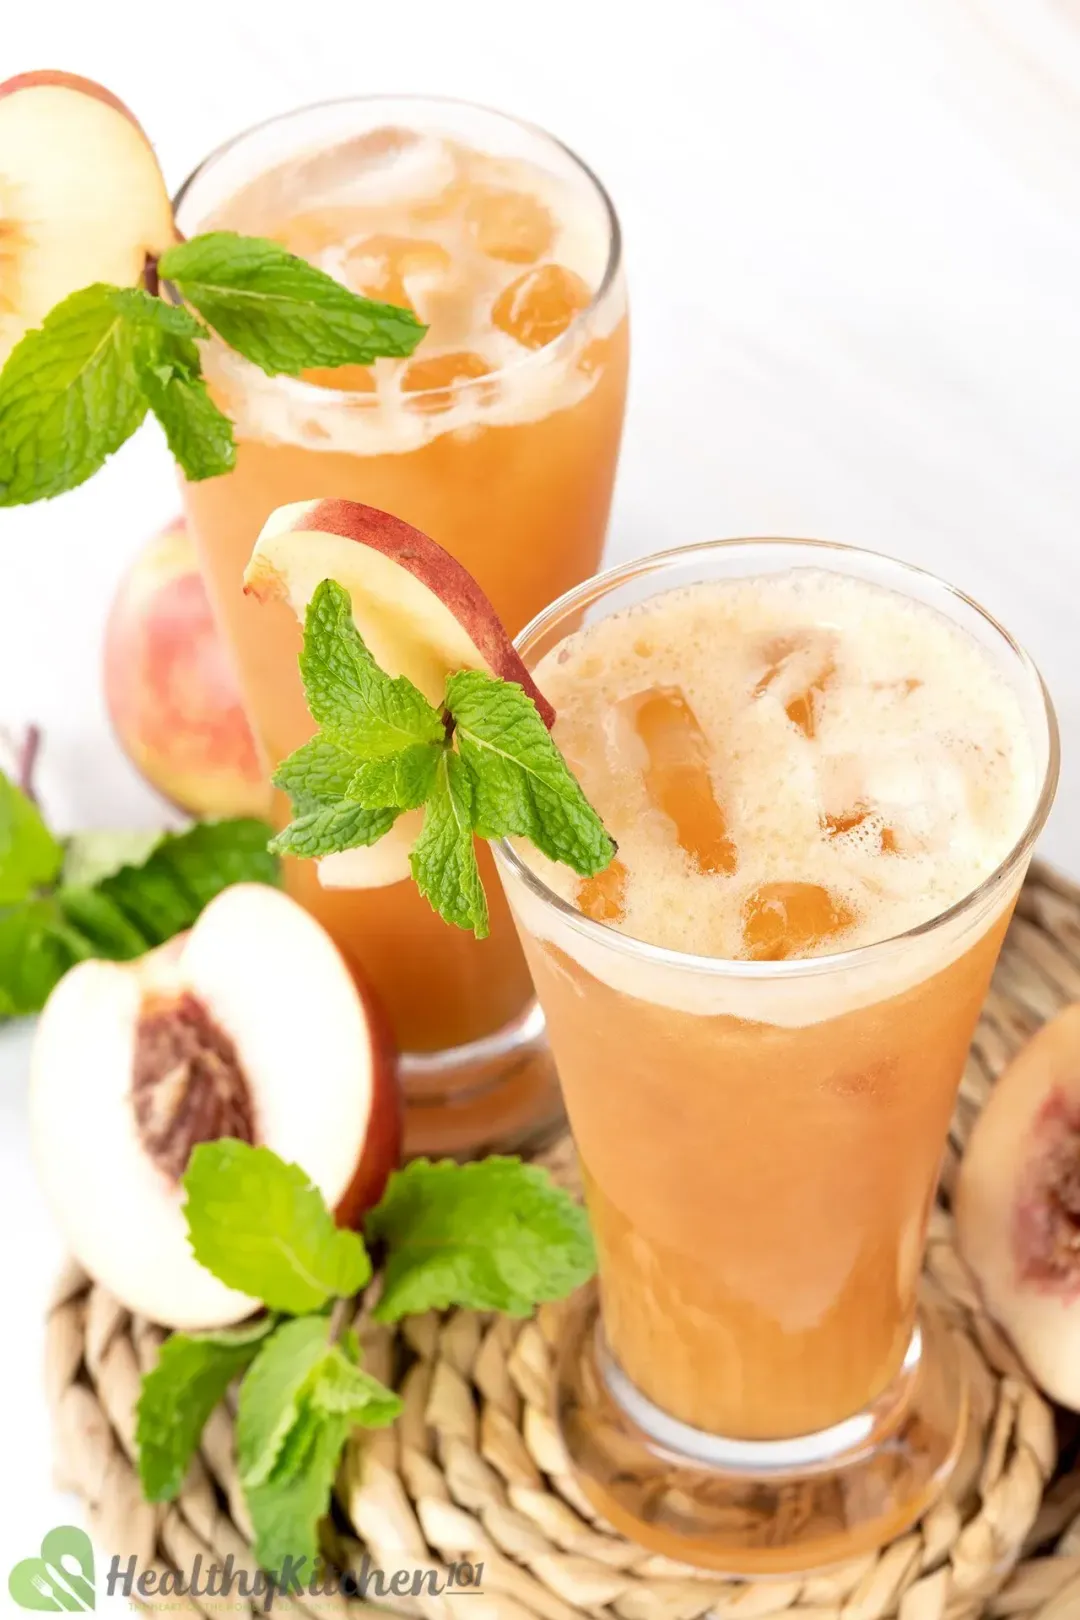 Two glasses of peach juice with ice and mint decorated on the rim, next to more mints and peach half